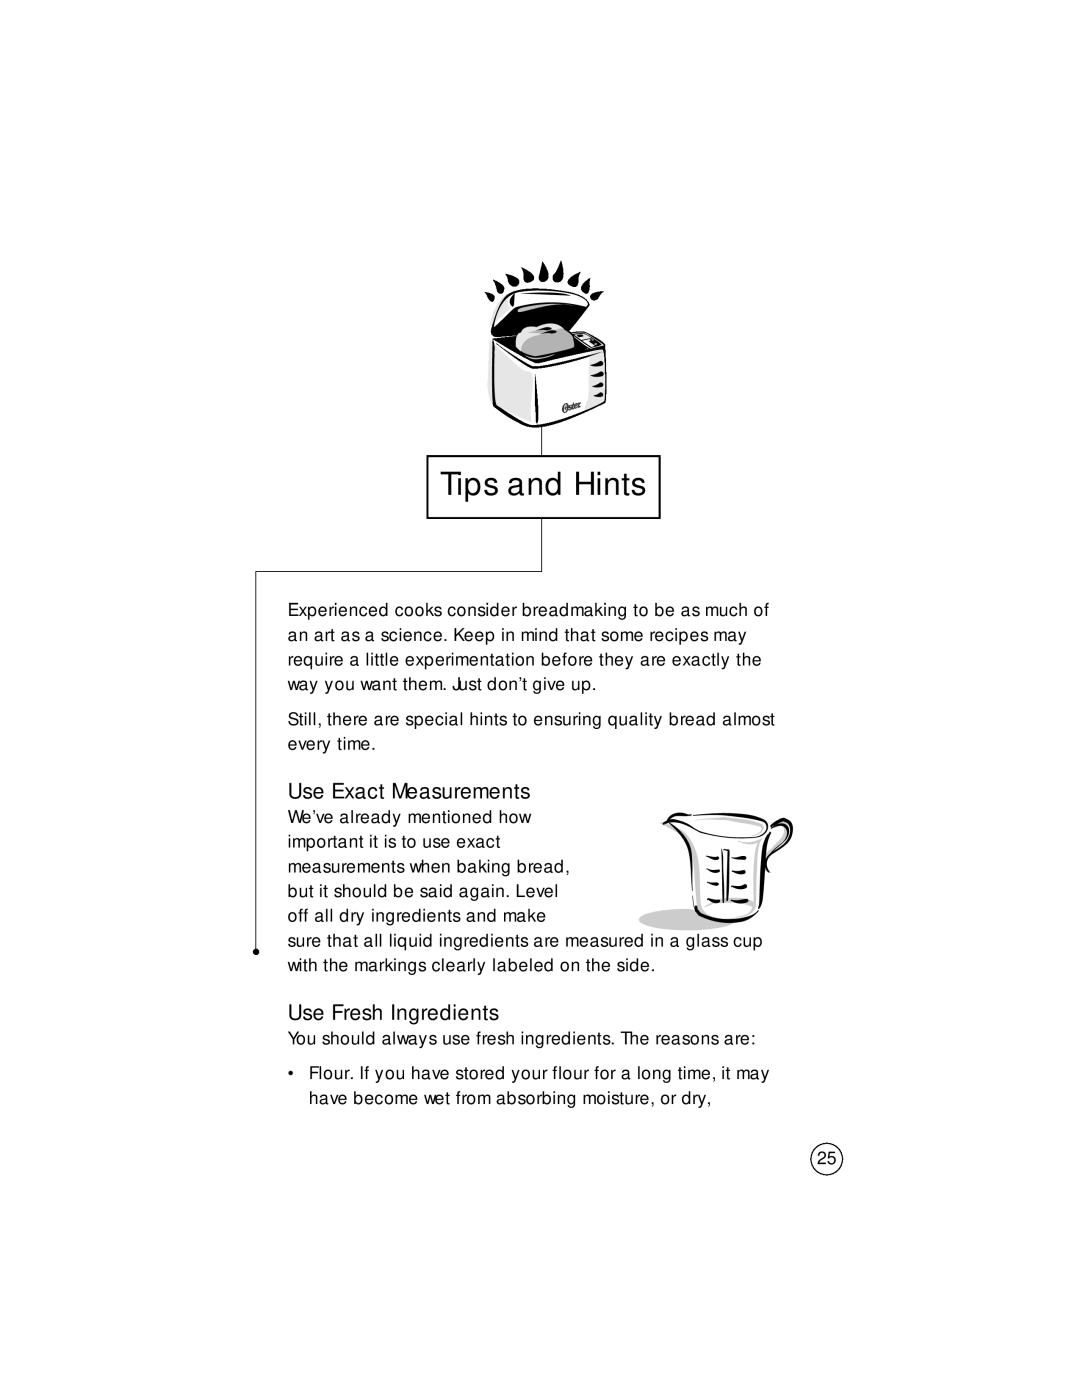 Oster Bread Maker user manual Tips and Hints, Use Exact Measurements, Use Fresh Ingredients 